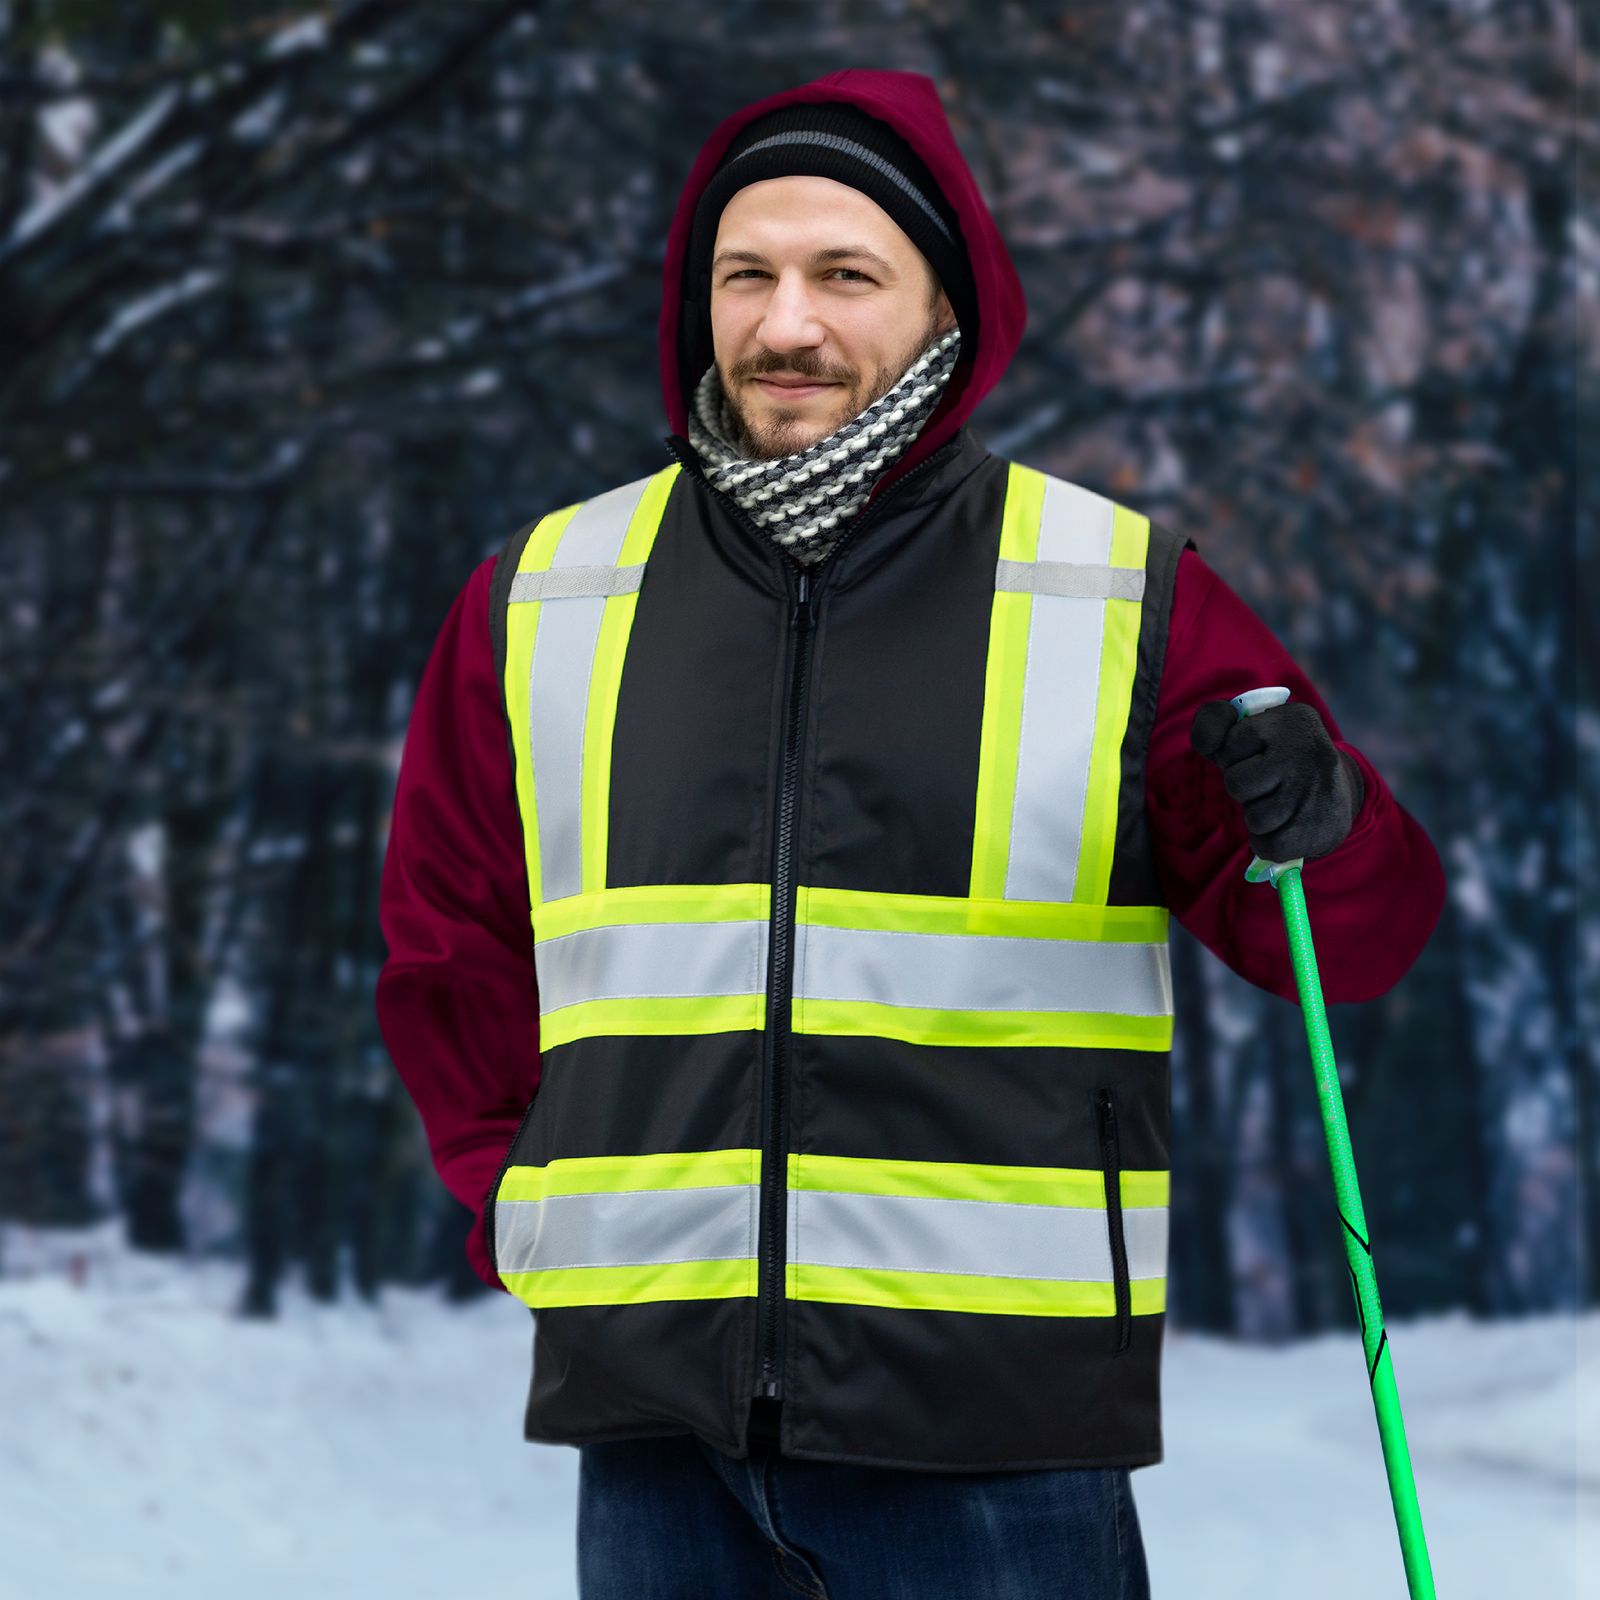 A man wearing the two tone black and yellow insulated safety vest for winter